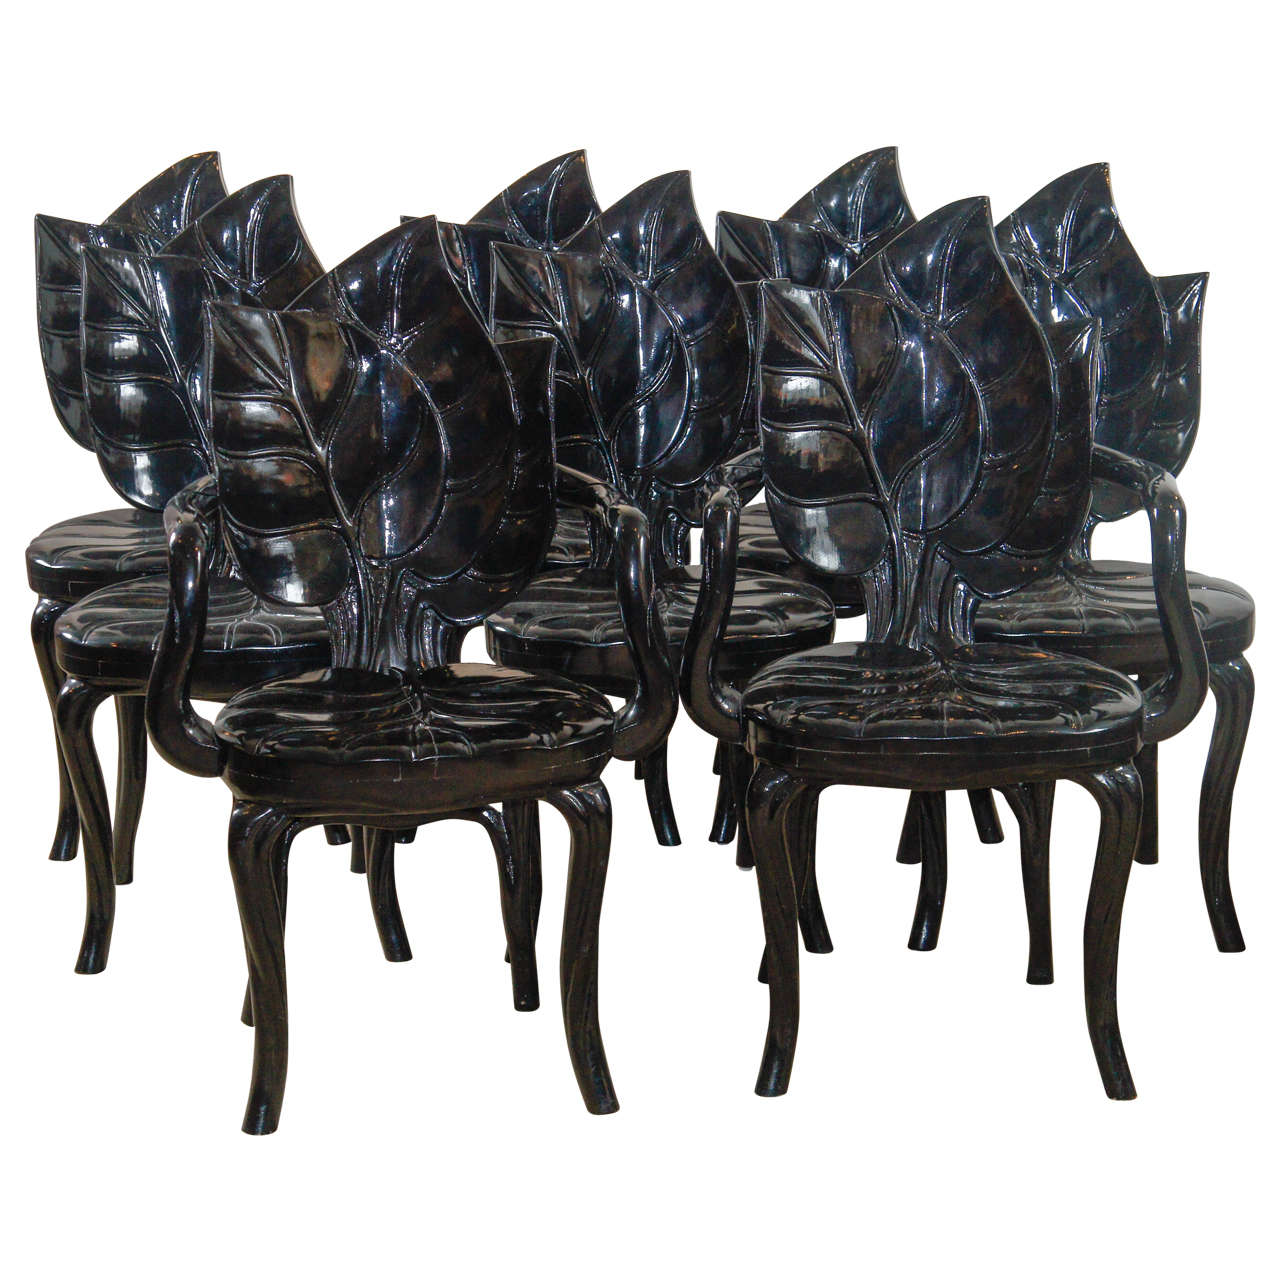 An Amazing Set of Eight Palm Leaf Chairs For Sale